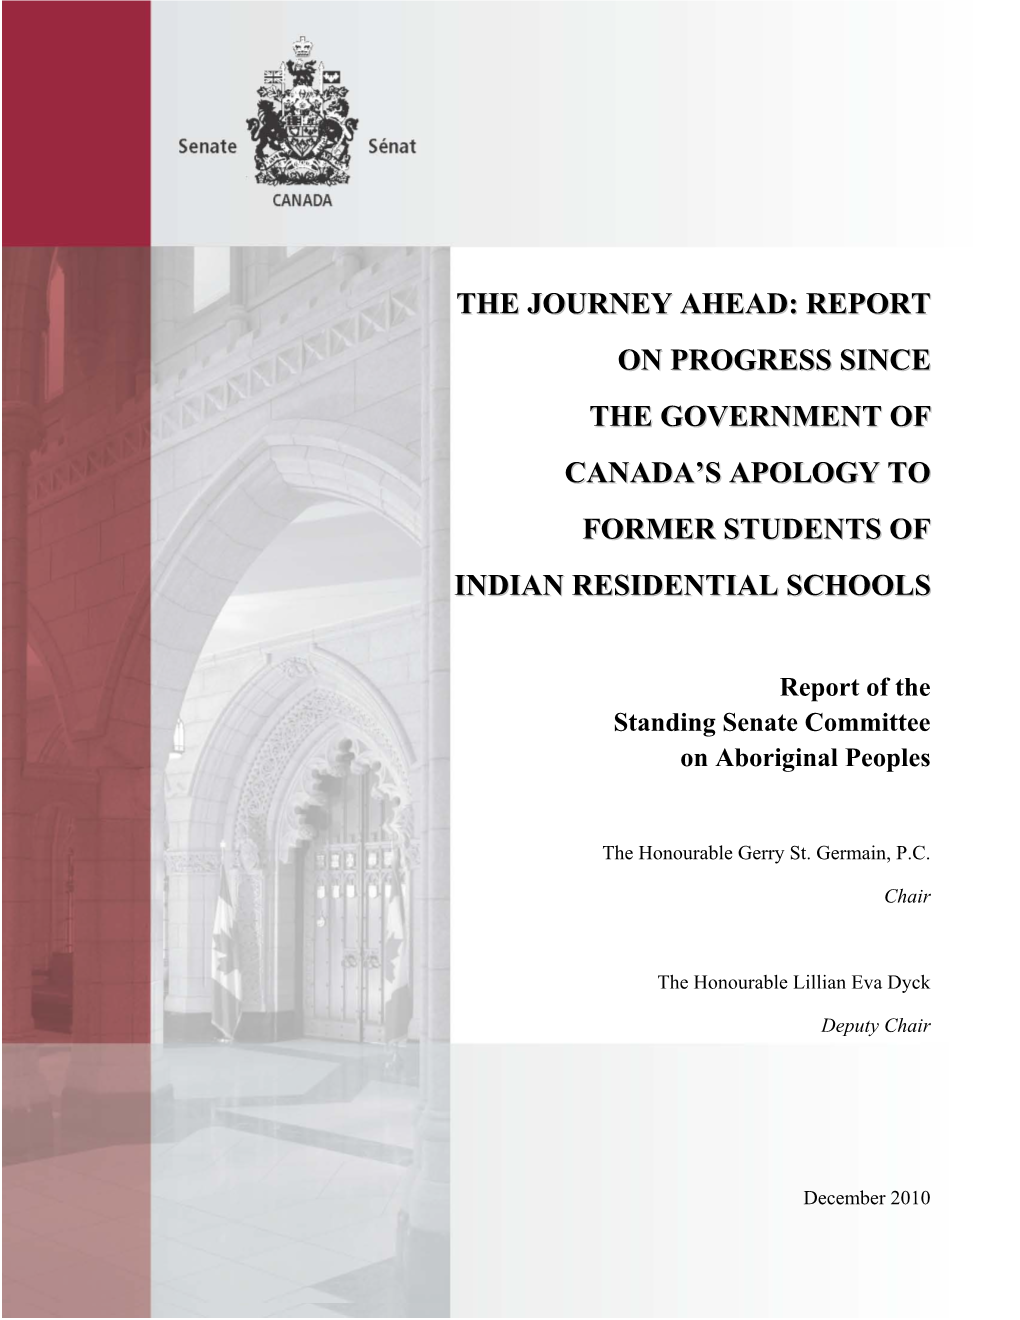 The Journey Ahead: Report on Progress Since the Government of Canada’S Apology to Former Students of Indian Residential Schools